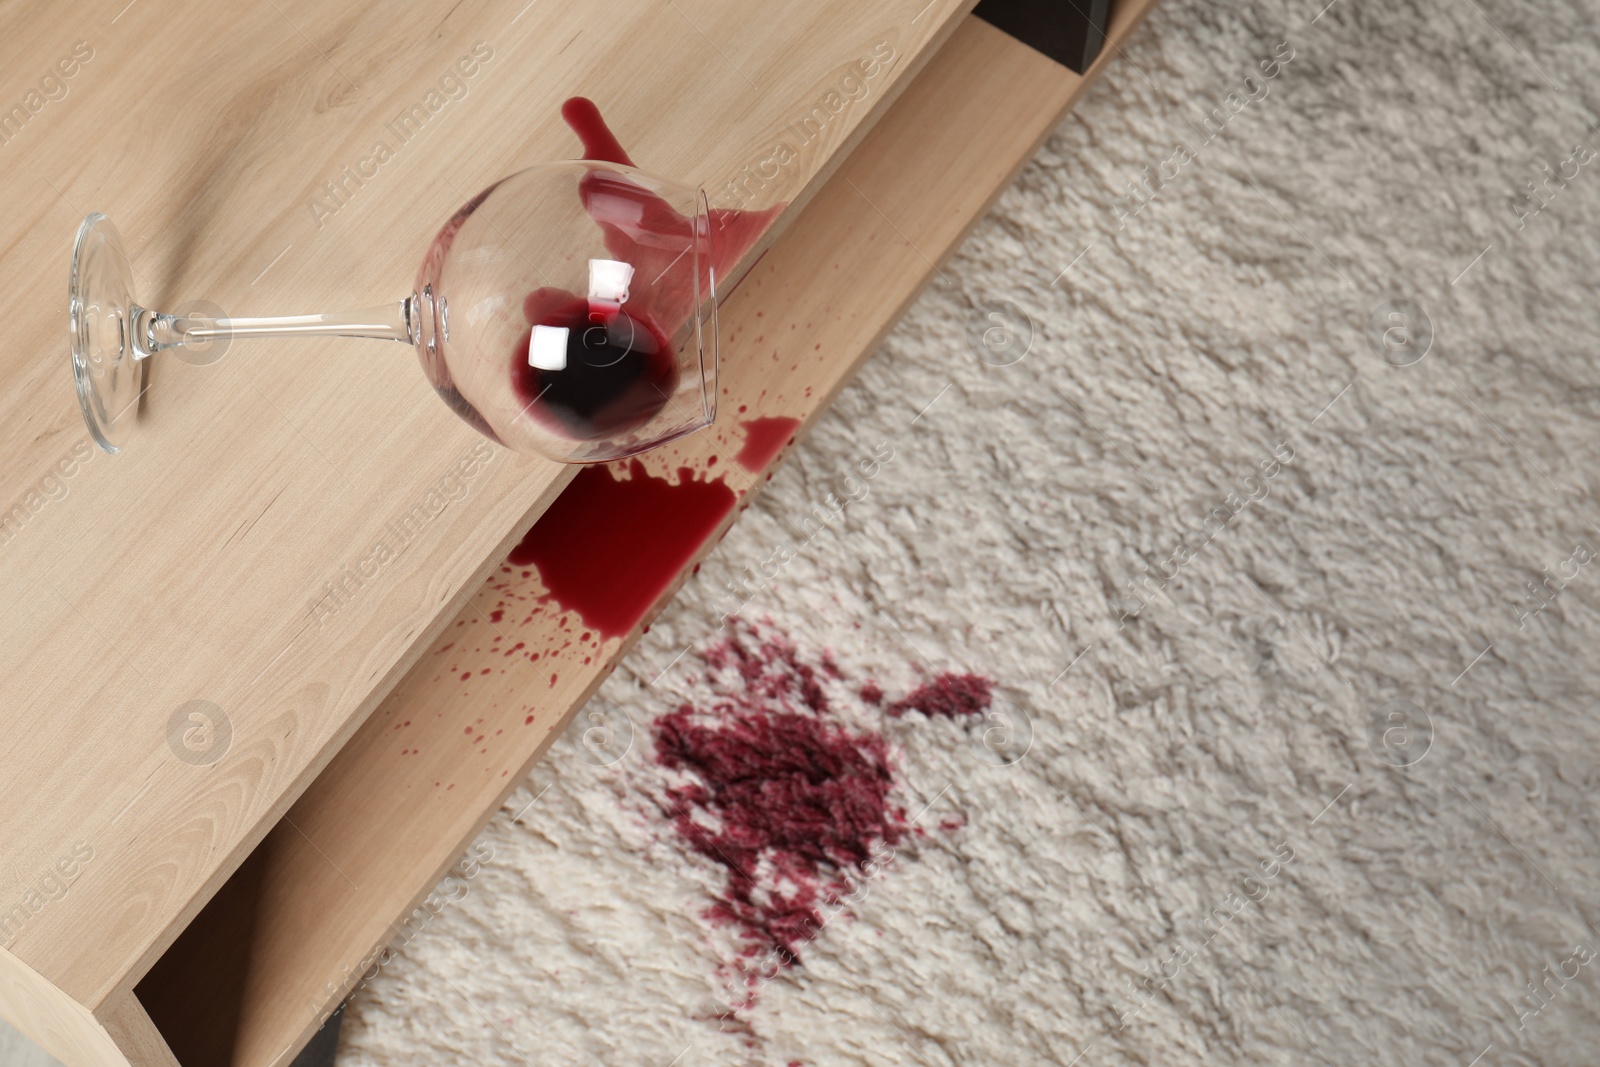 Photo of Overturned glass and spilled red wine on white carpet indoors, above view